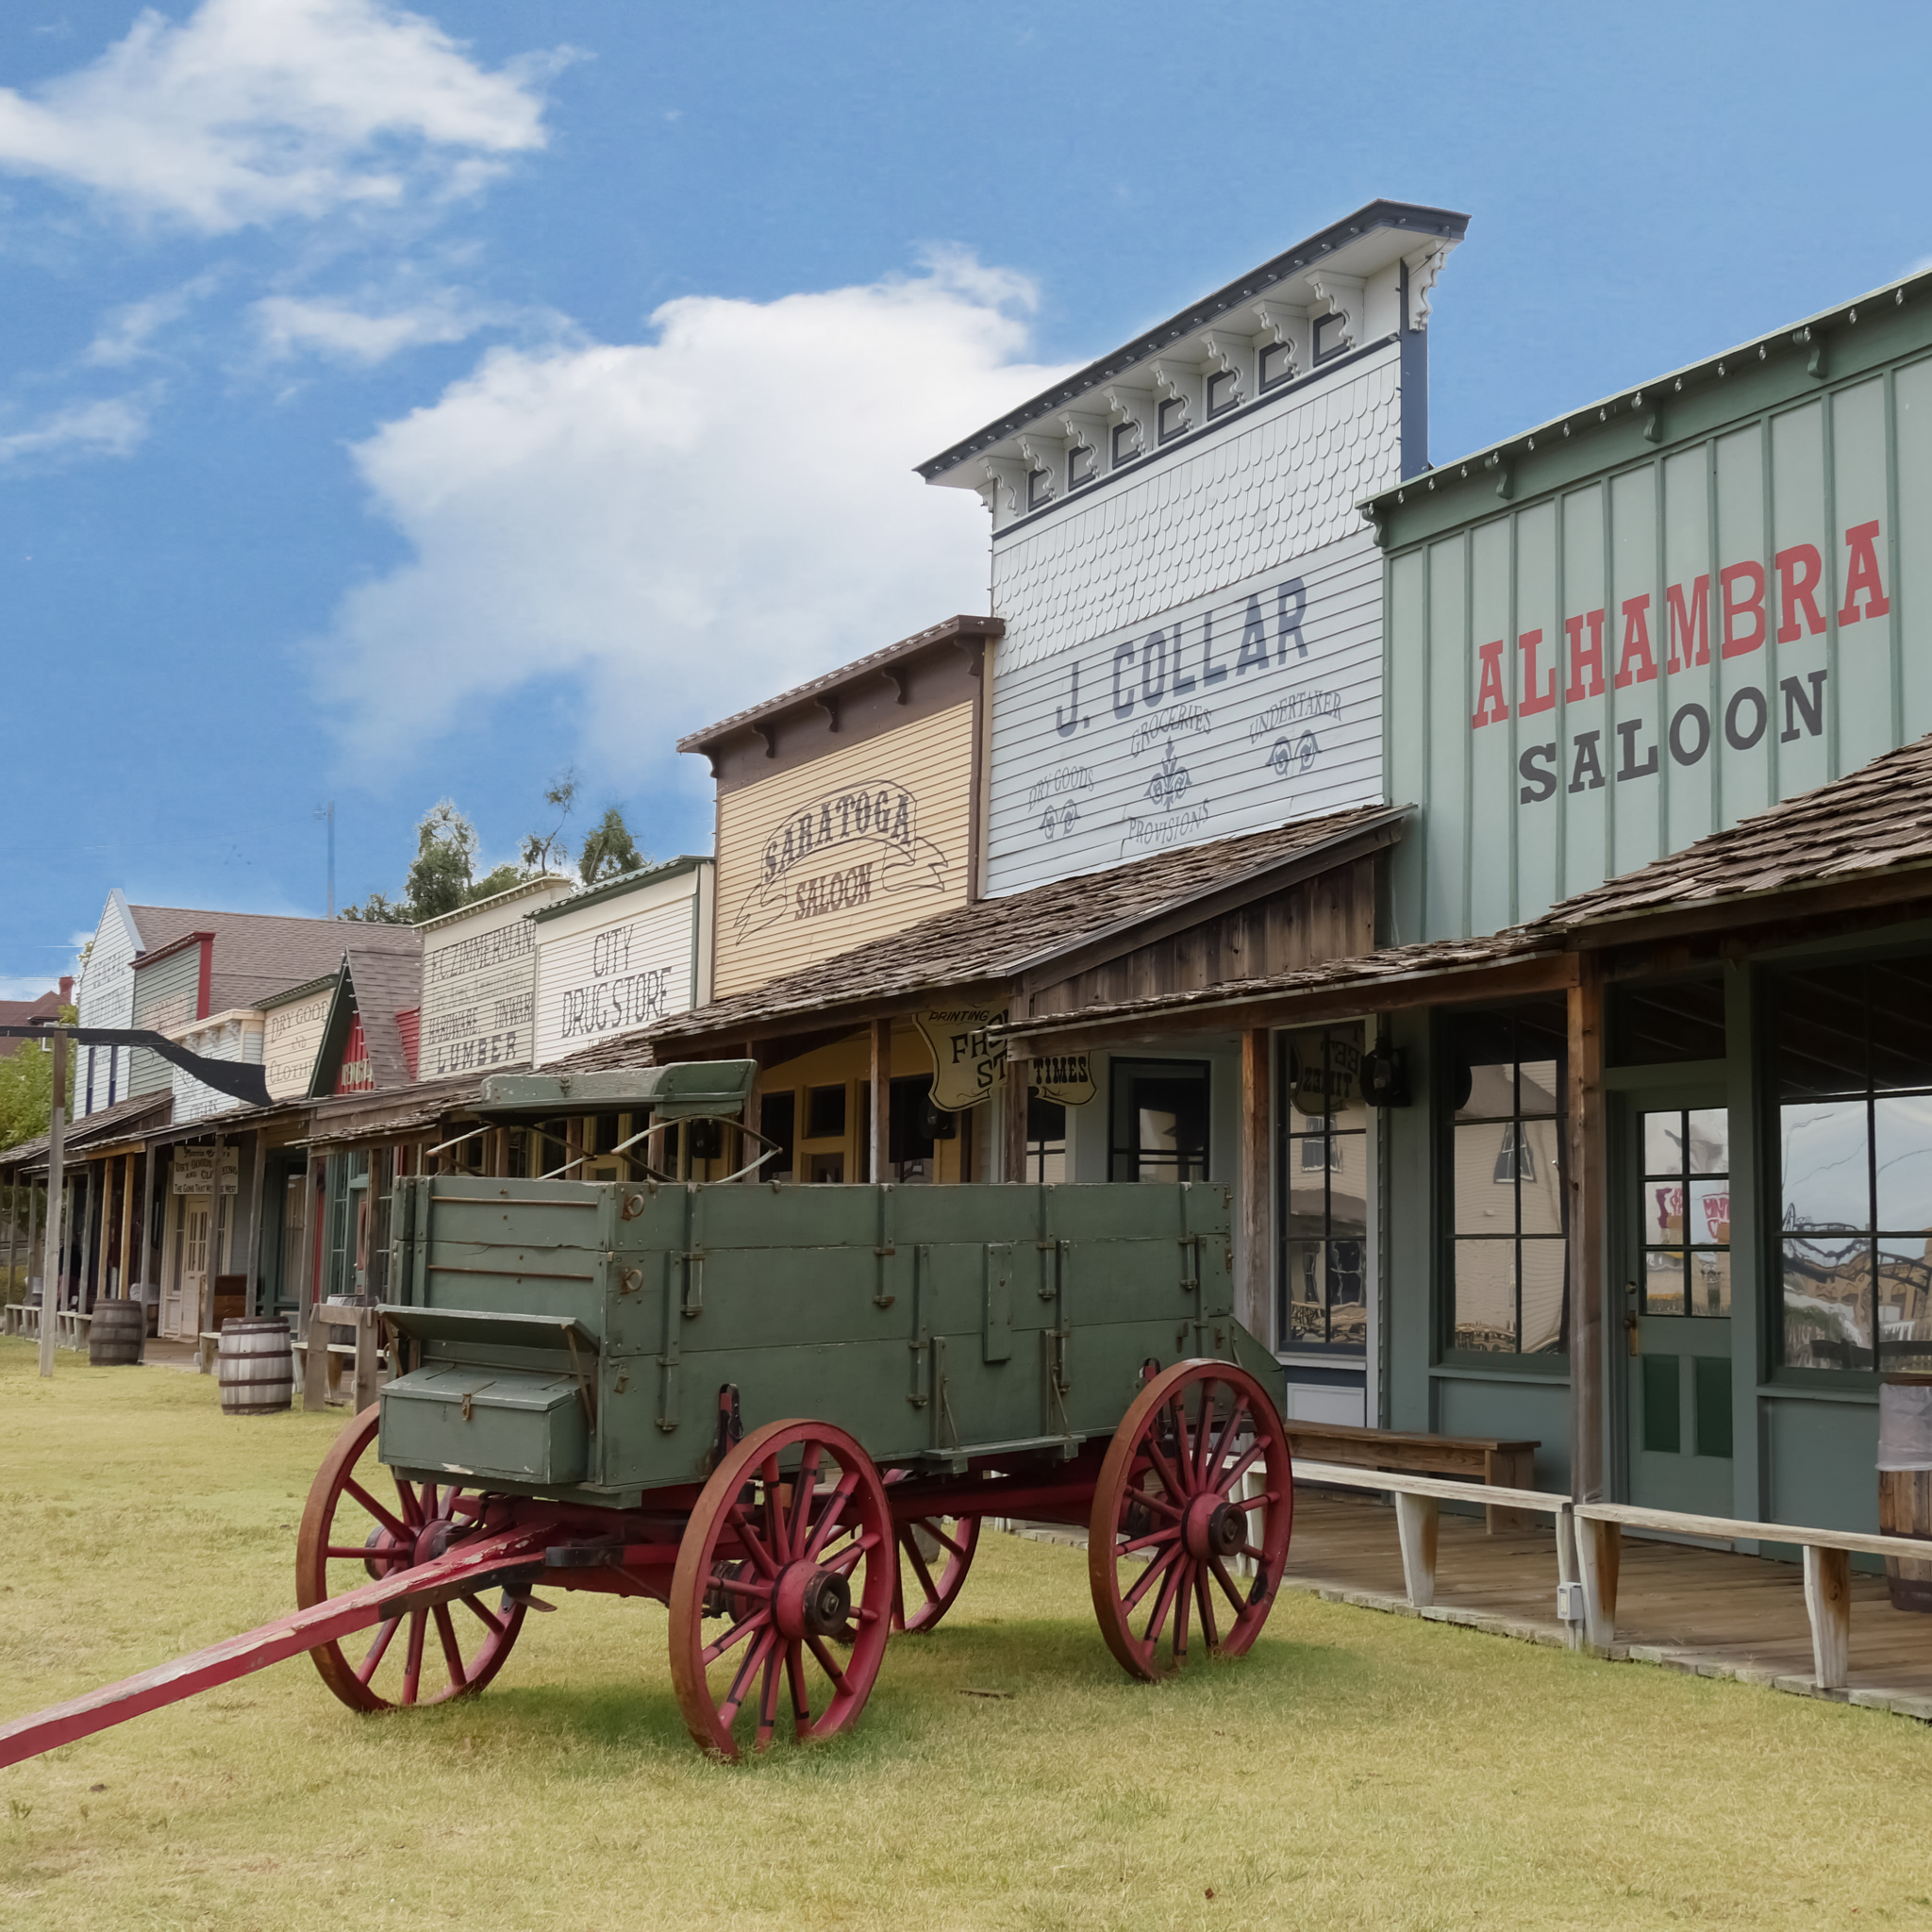 Fans of Westerns will love Dodge City, which proudly celebrates